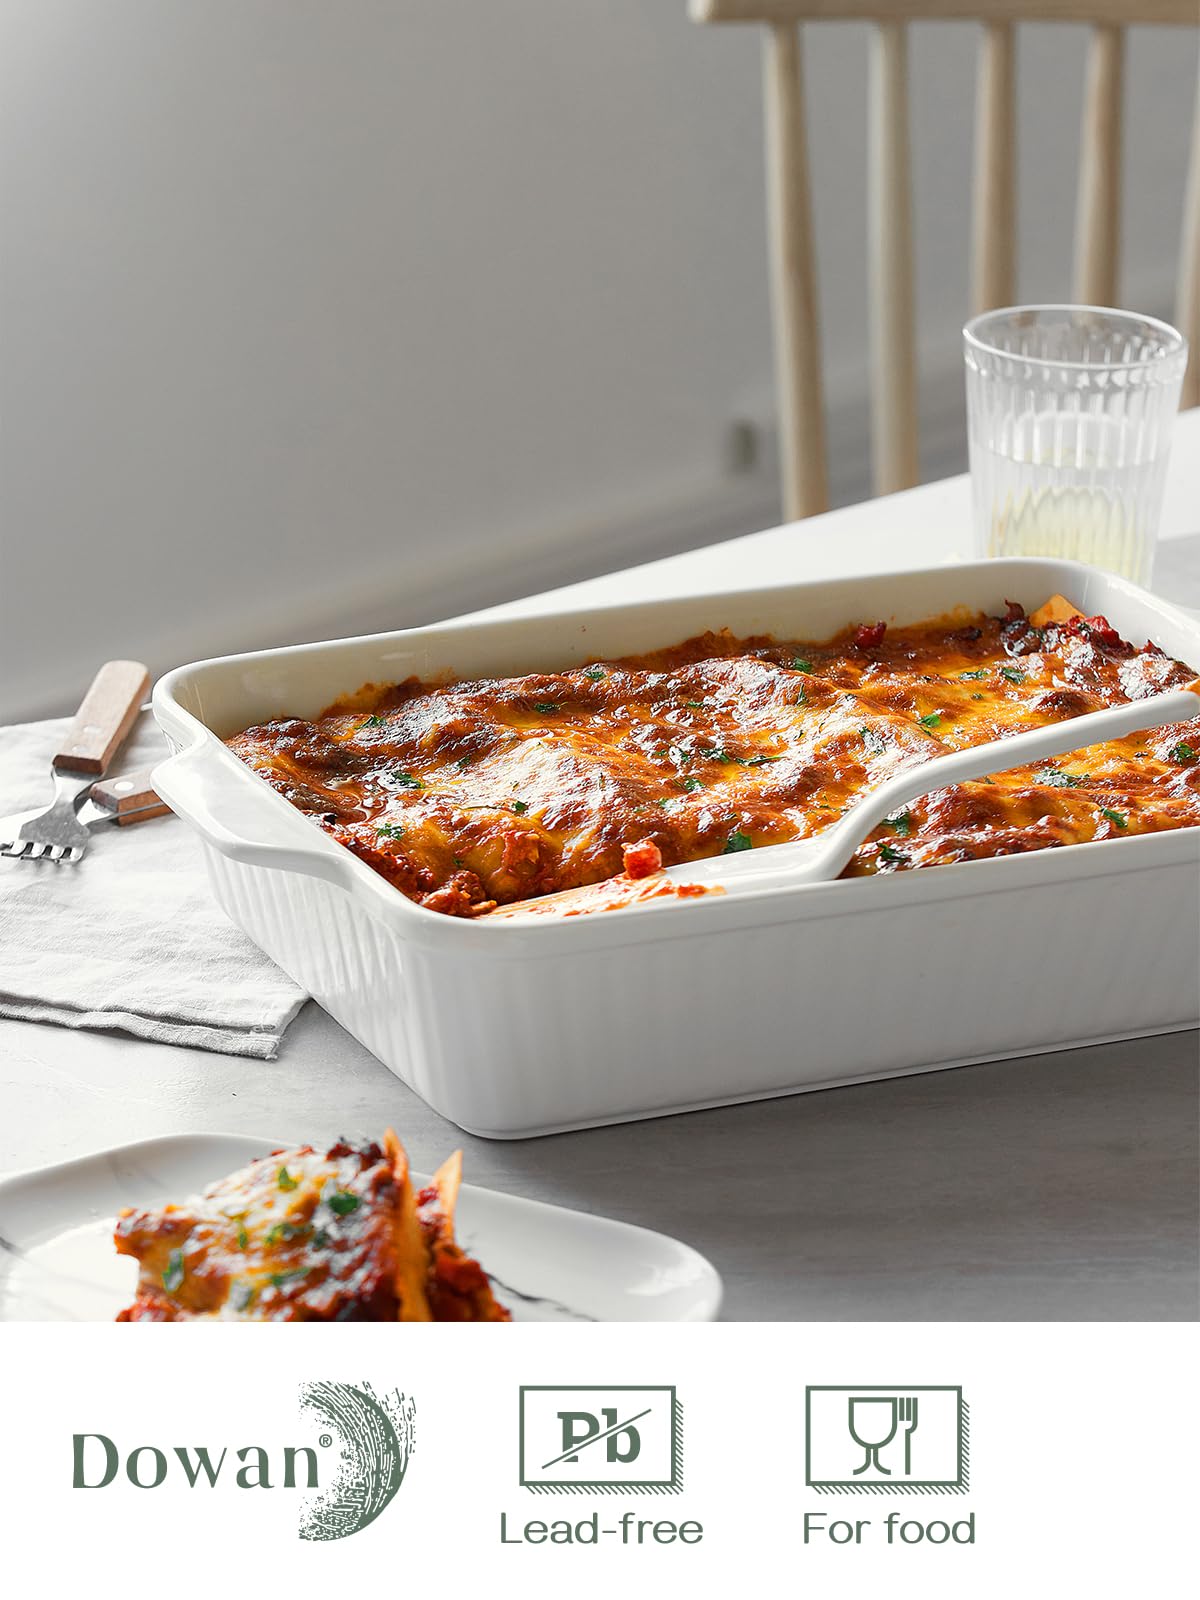 DOWAN Casserole Dish, 9x13 Ceramic Baking Dish, Large Lasagna Pan Deep, Casserole Dishes for Oven, 135 oz Deep Baking Pan with Handles, Oven Safe and Durable Bakeware for Lasagna, Roasts, Wedding Gifts, White